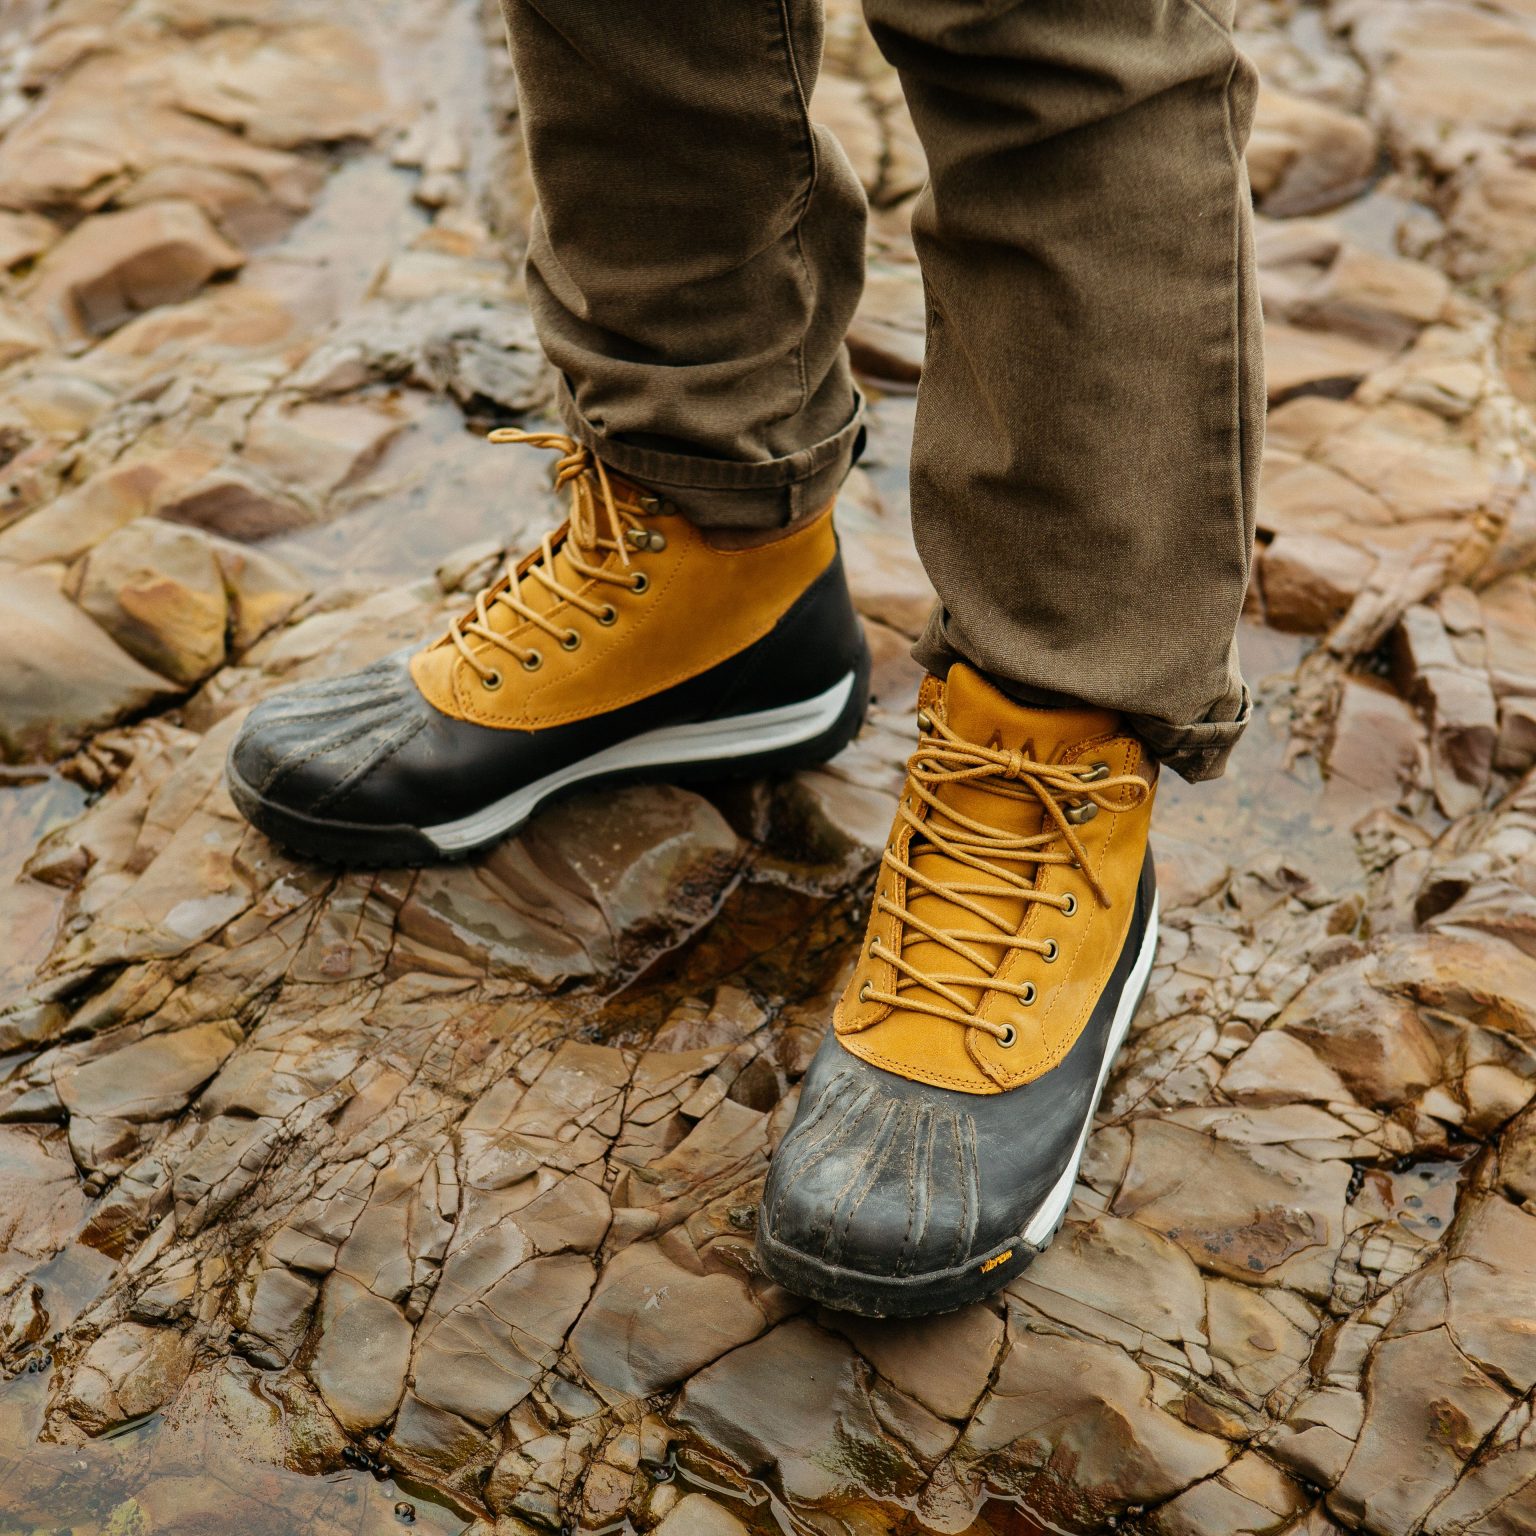 Huckberry All-Weather Duckboots | The Coolector